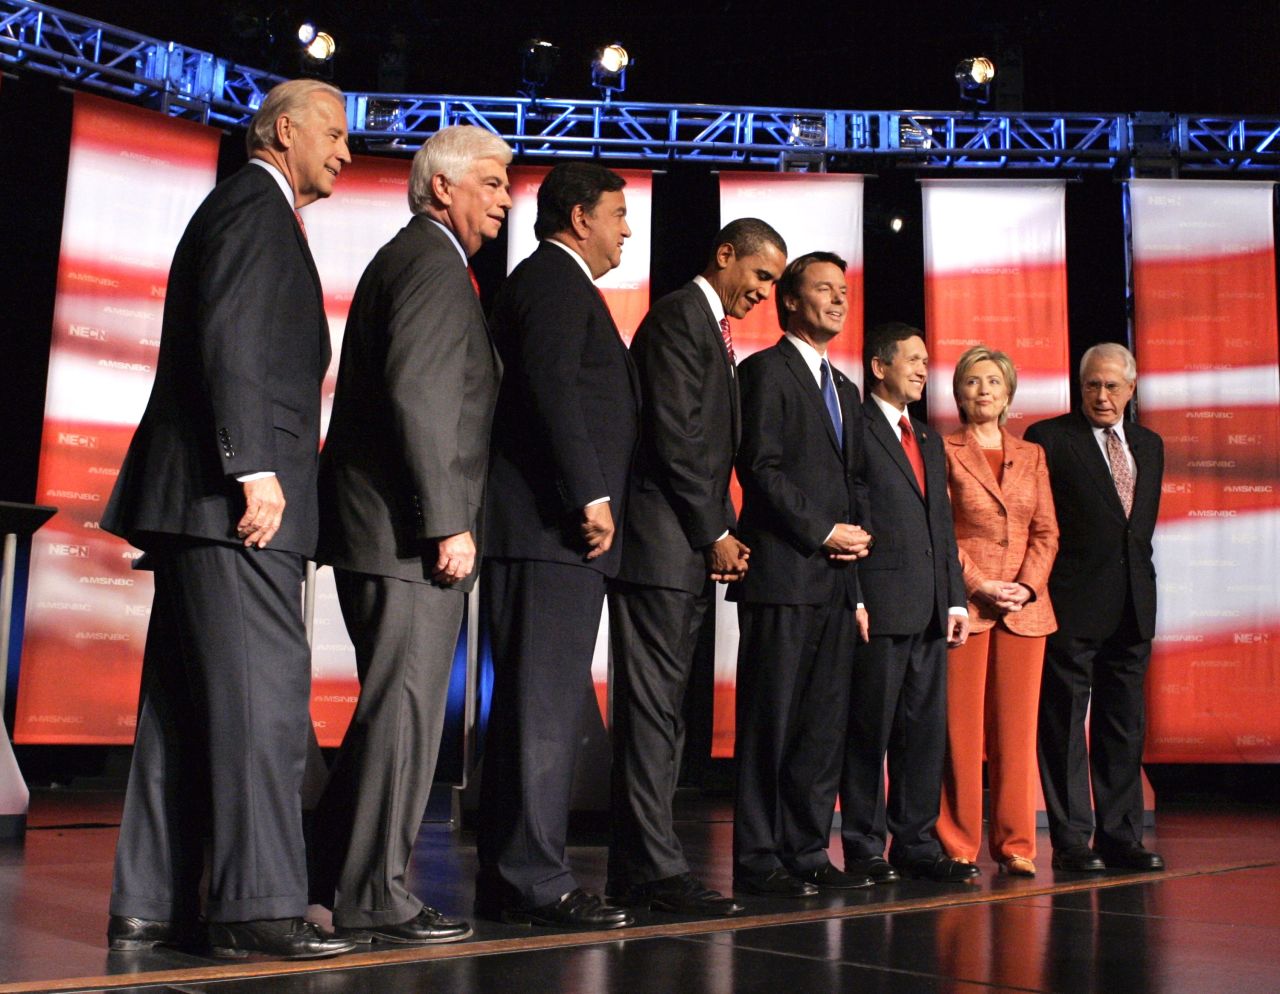 In September 2007, Edwards attends a Democratic presidential debate in Hanover, New Hampshire.